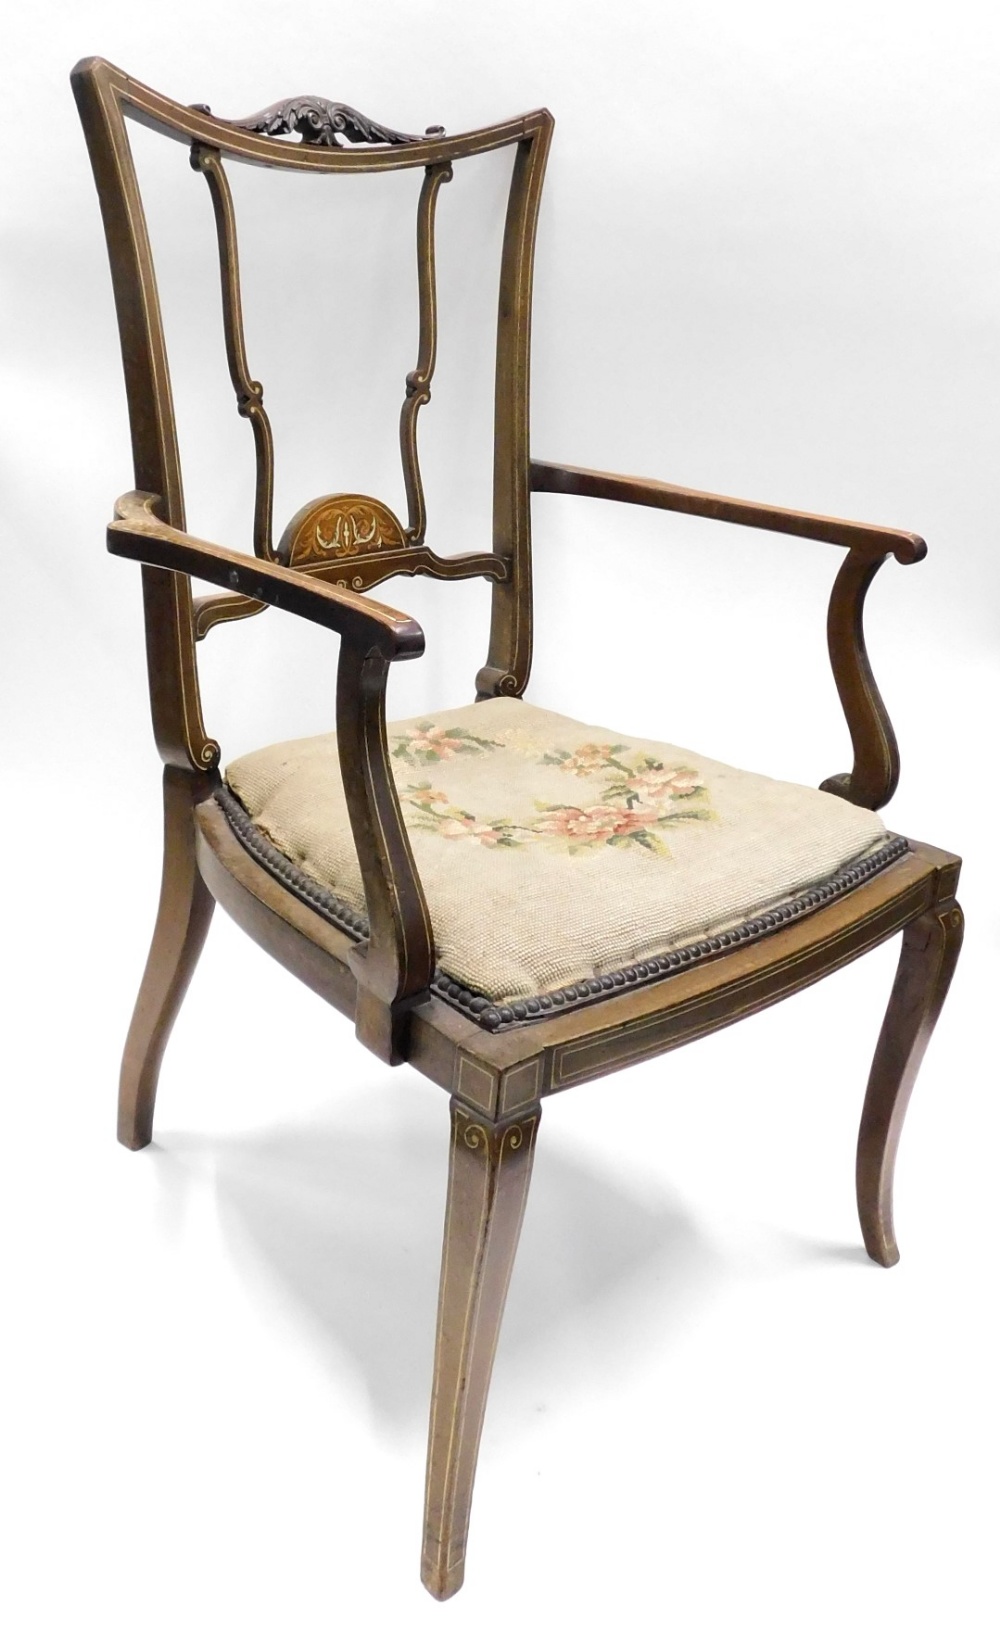 An Edwardian mahogany and inlaid open armchair, with padded seat on splayed legs.